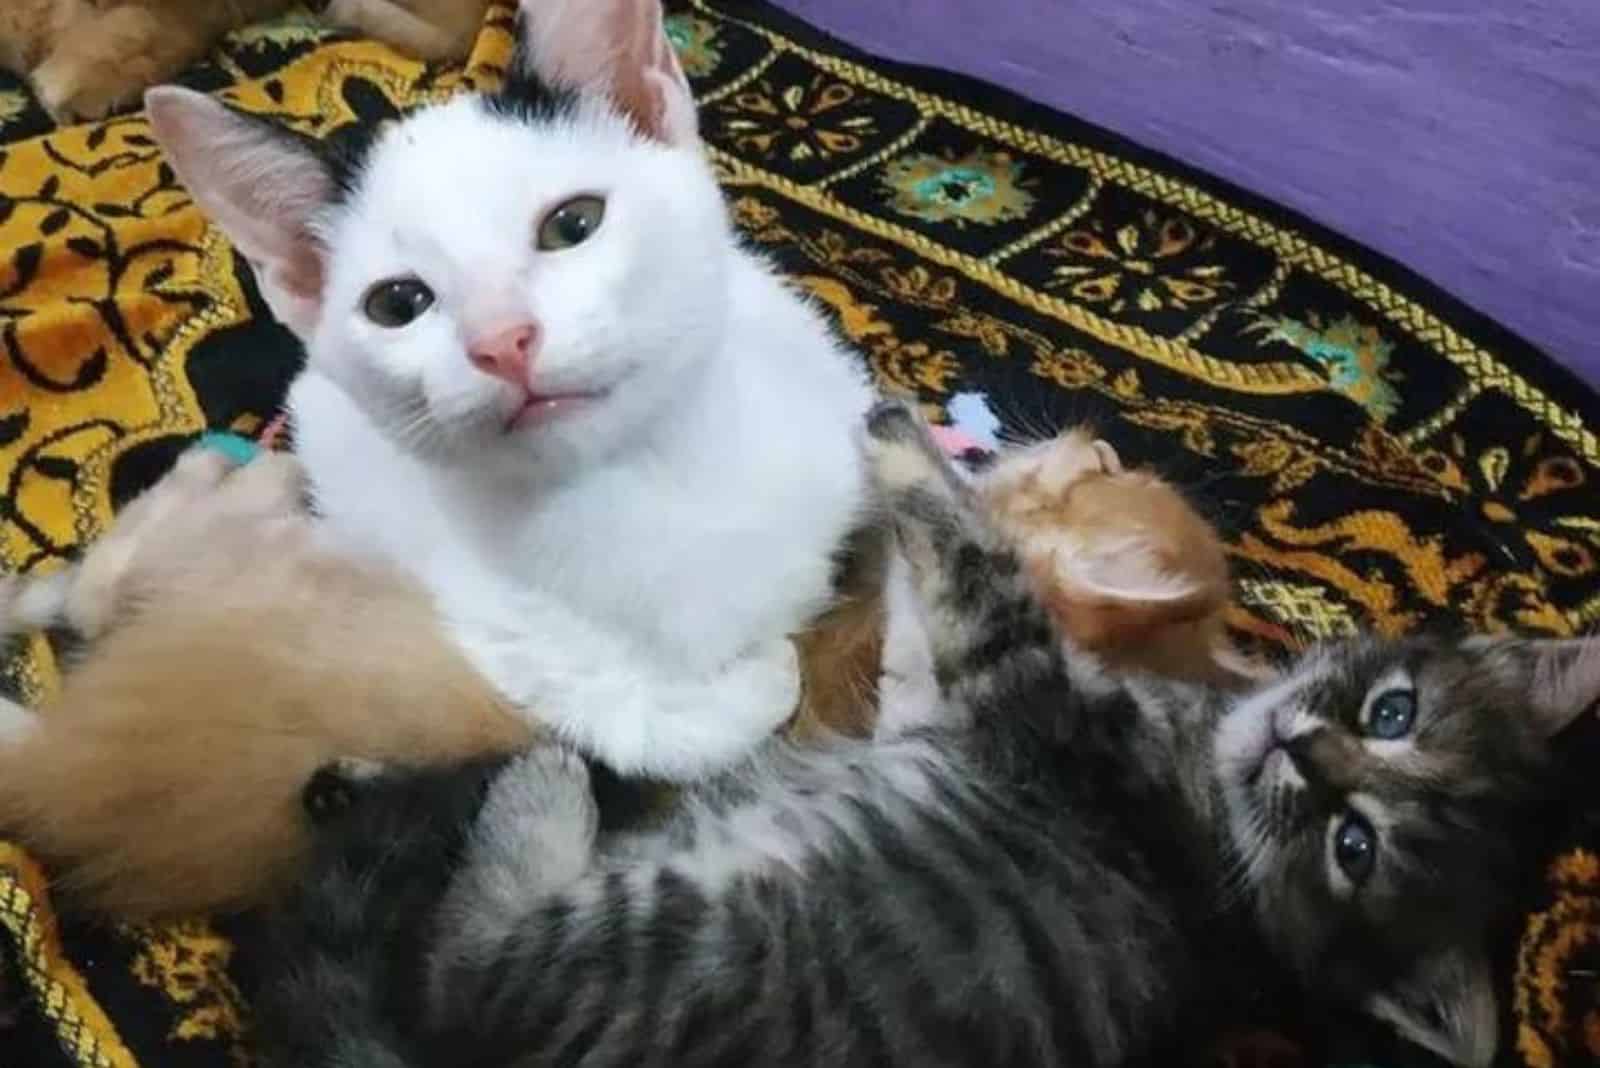 the orphan kitten plays with the other kittens